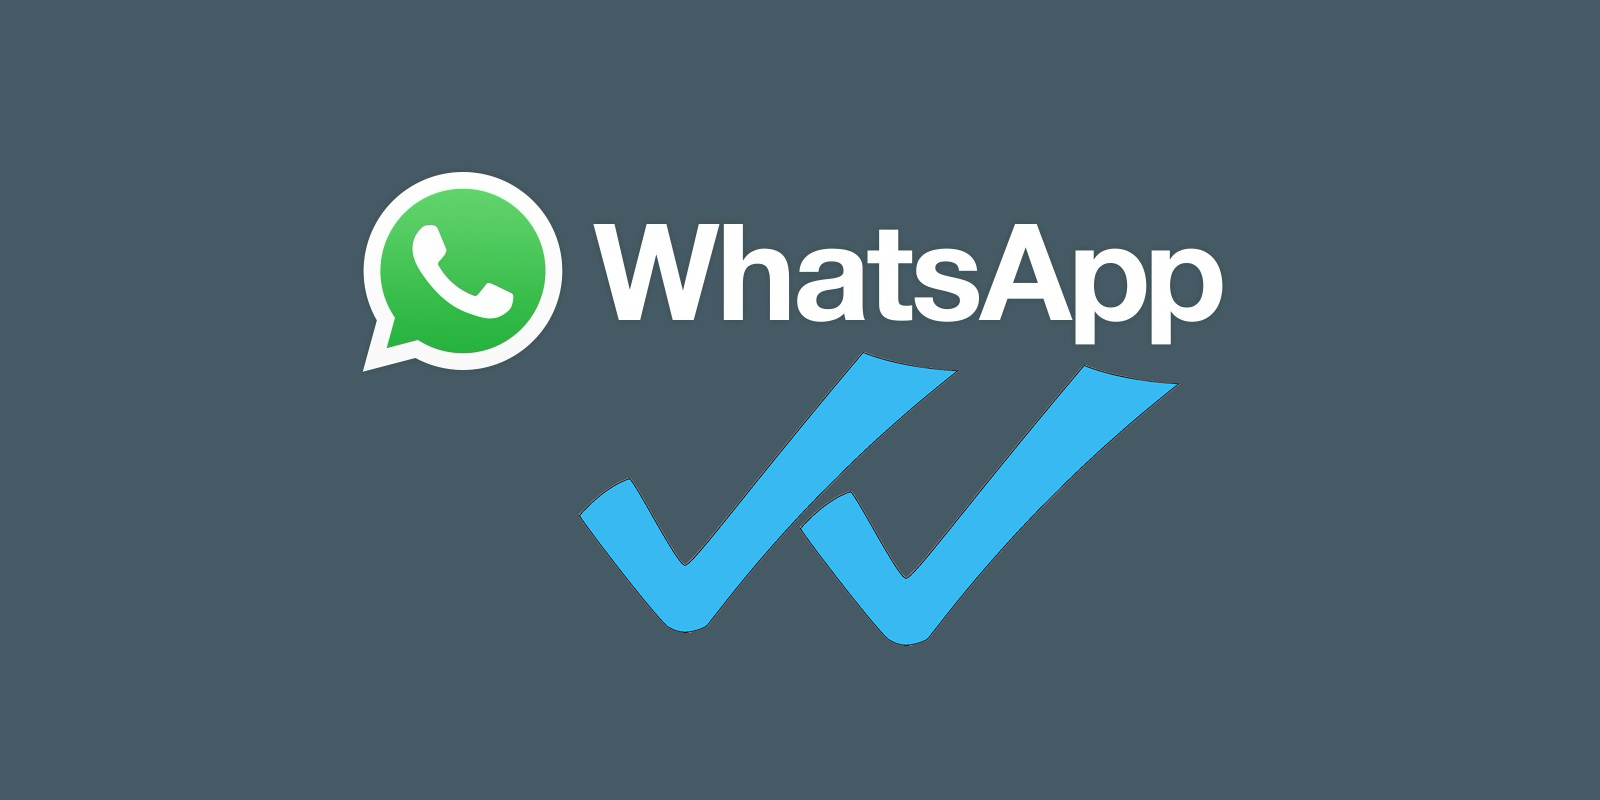 WhatsApp logo with two blue check marks on a grey background